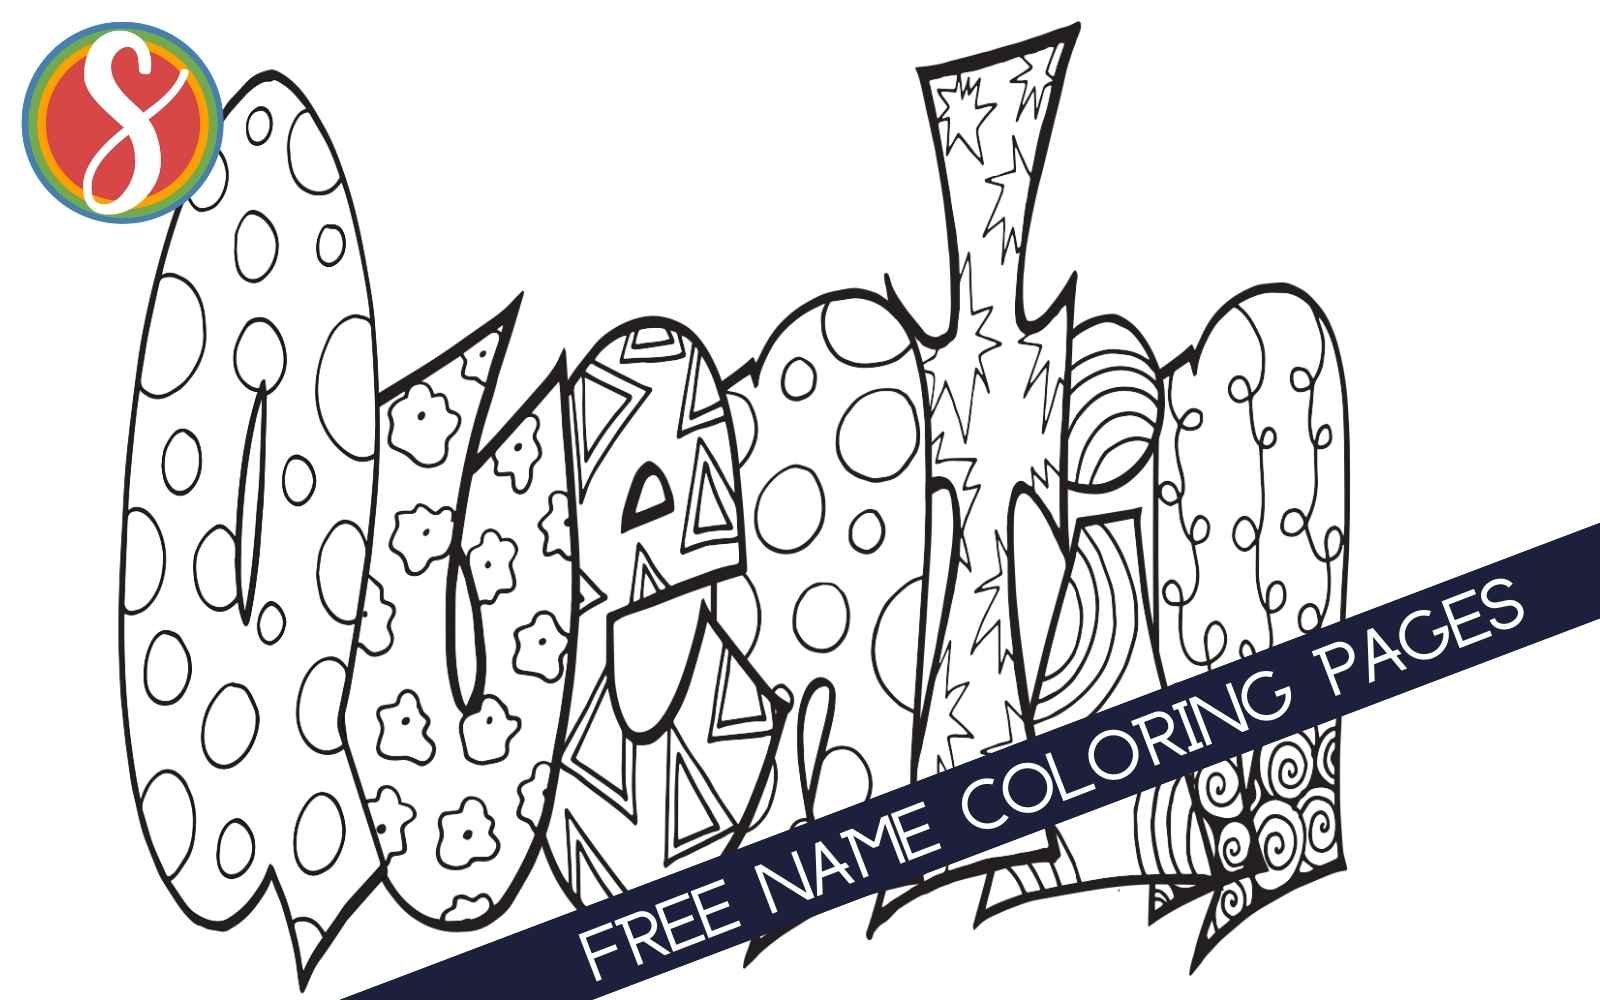 Free name coloring pages â stevie doodles